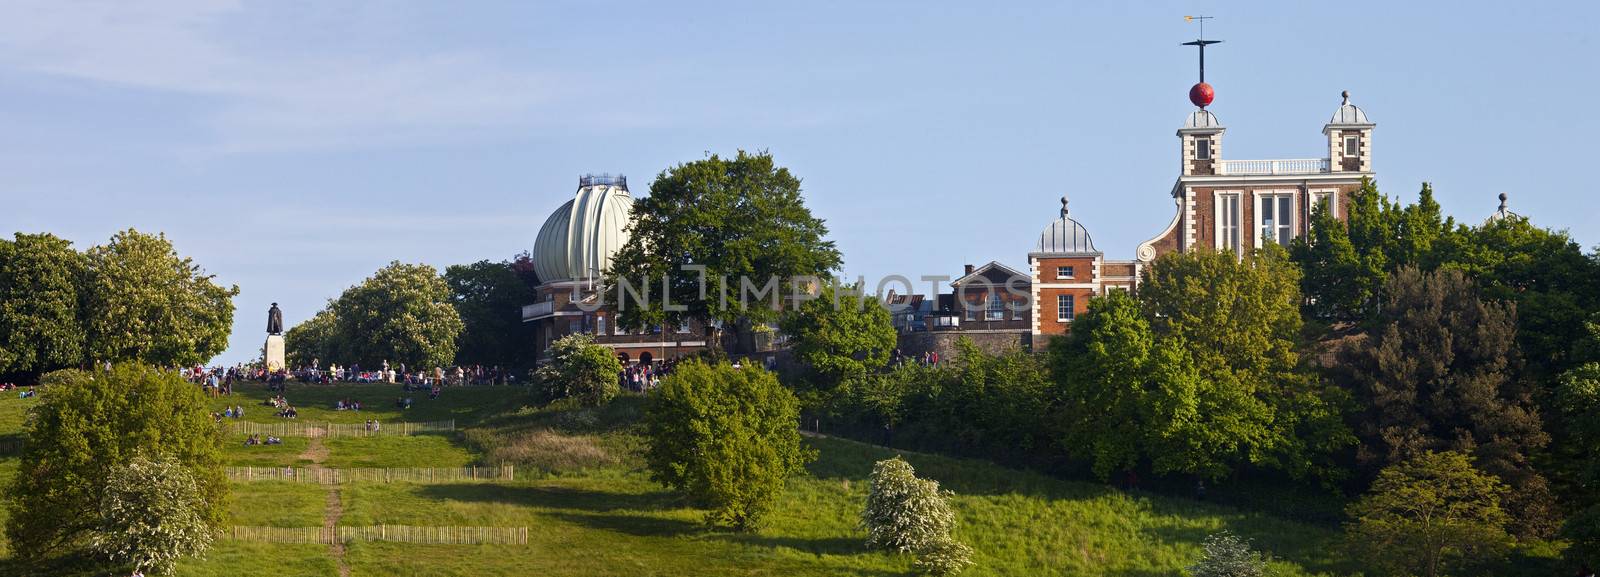 A panoramic view of the Royal Observatory and the General Wolfe statue in Greenwich, London.